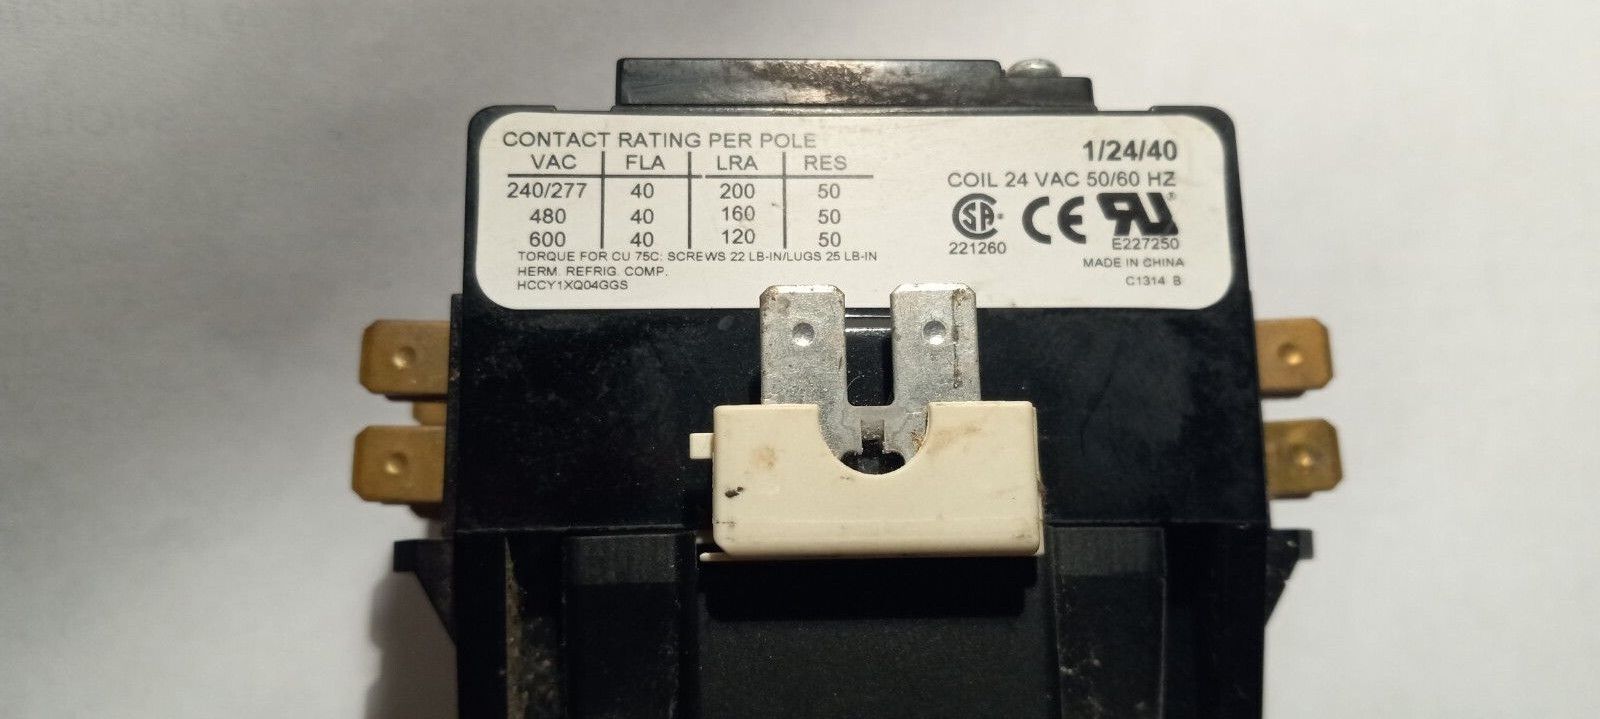 E227250 Contactor Double Two Pole 40 Amps 24 Volts for Air Conditioner 